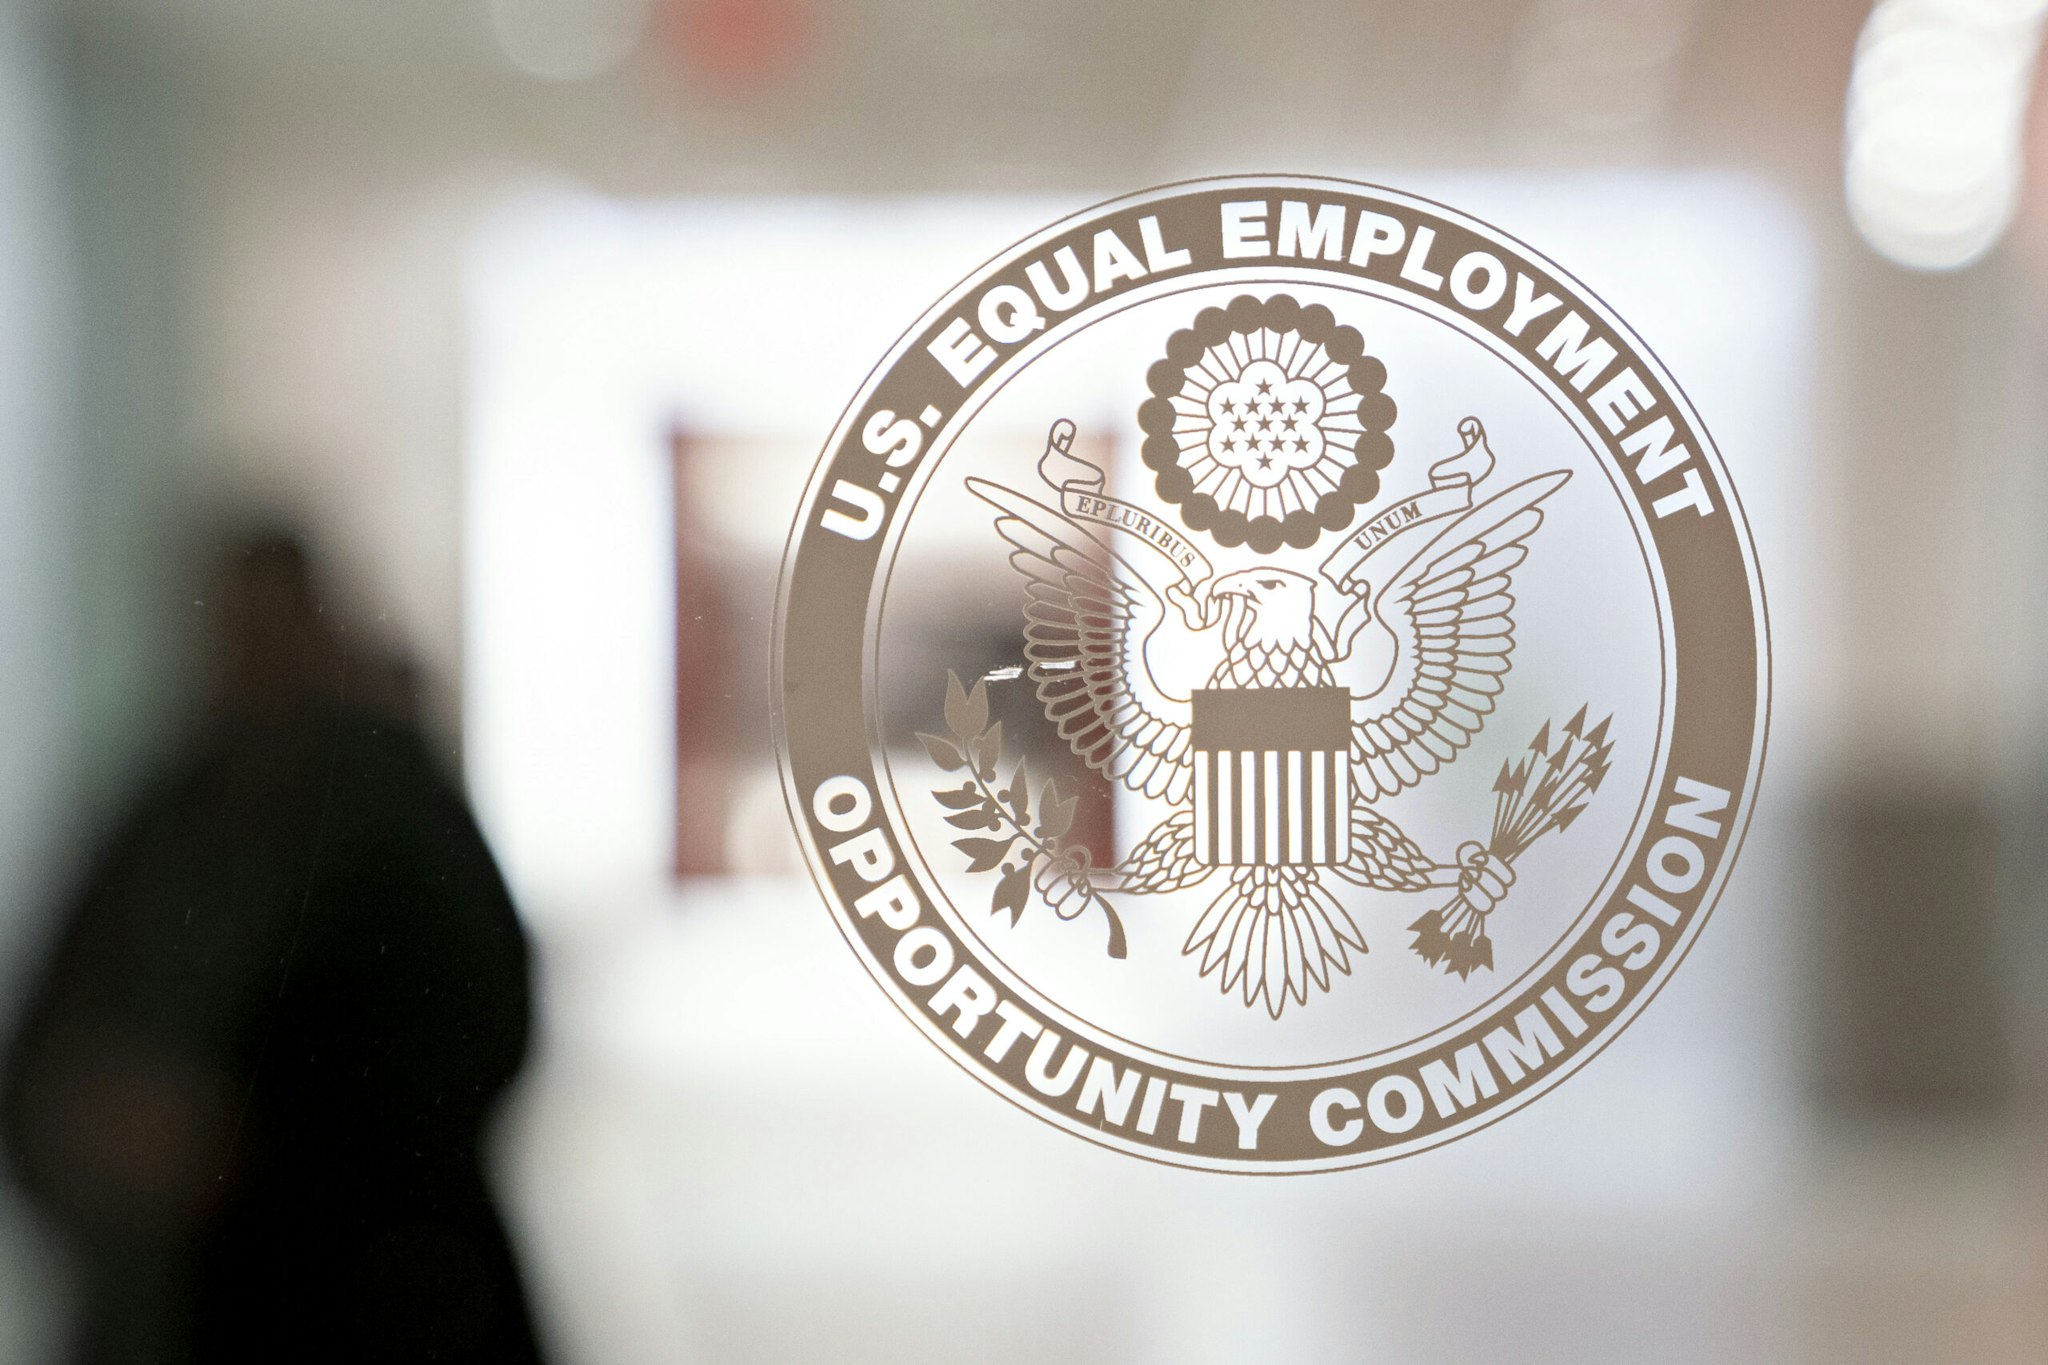 The Equal Employment Opportunity Commission (EEOC) seal is displayed on a window at the headquarters in Washington, D.C., U.S., on Tuesday, Feb. 18, 2020. The Trump administration wants to cut fiscal year 2021 spending on the Labor Department, National Labor Relations Board, and EEOC, reviving previous belt-tightening bids that have not been approved by Congress. Photographer: